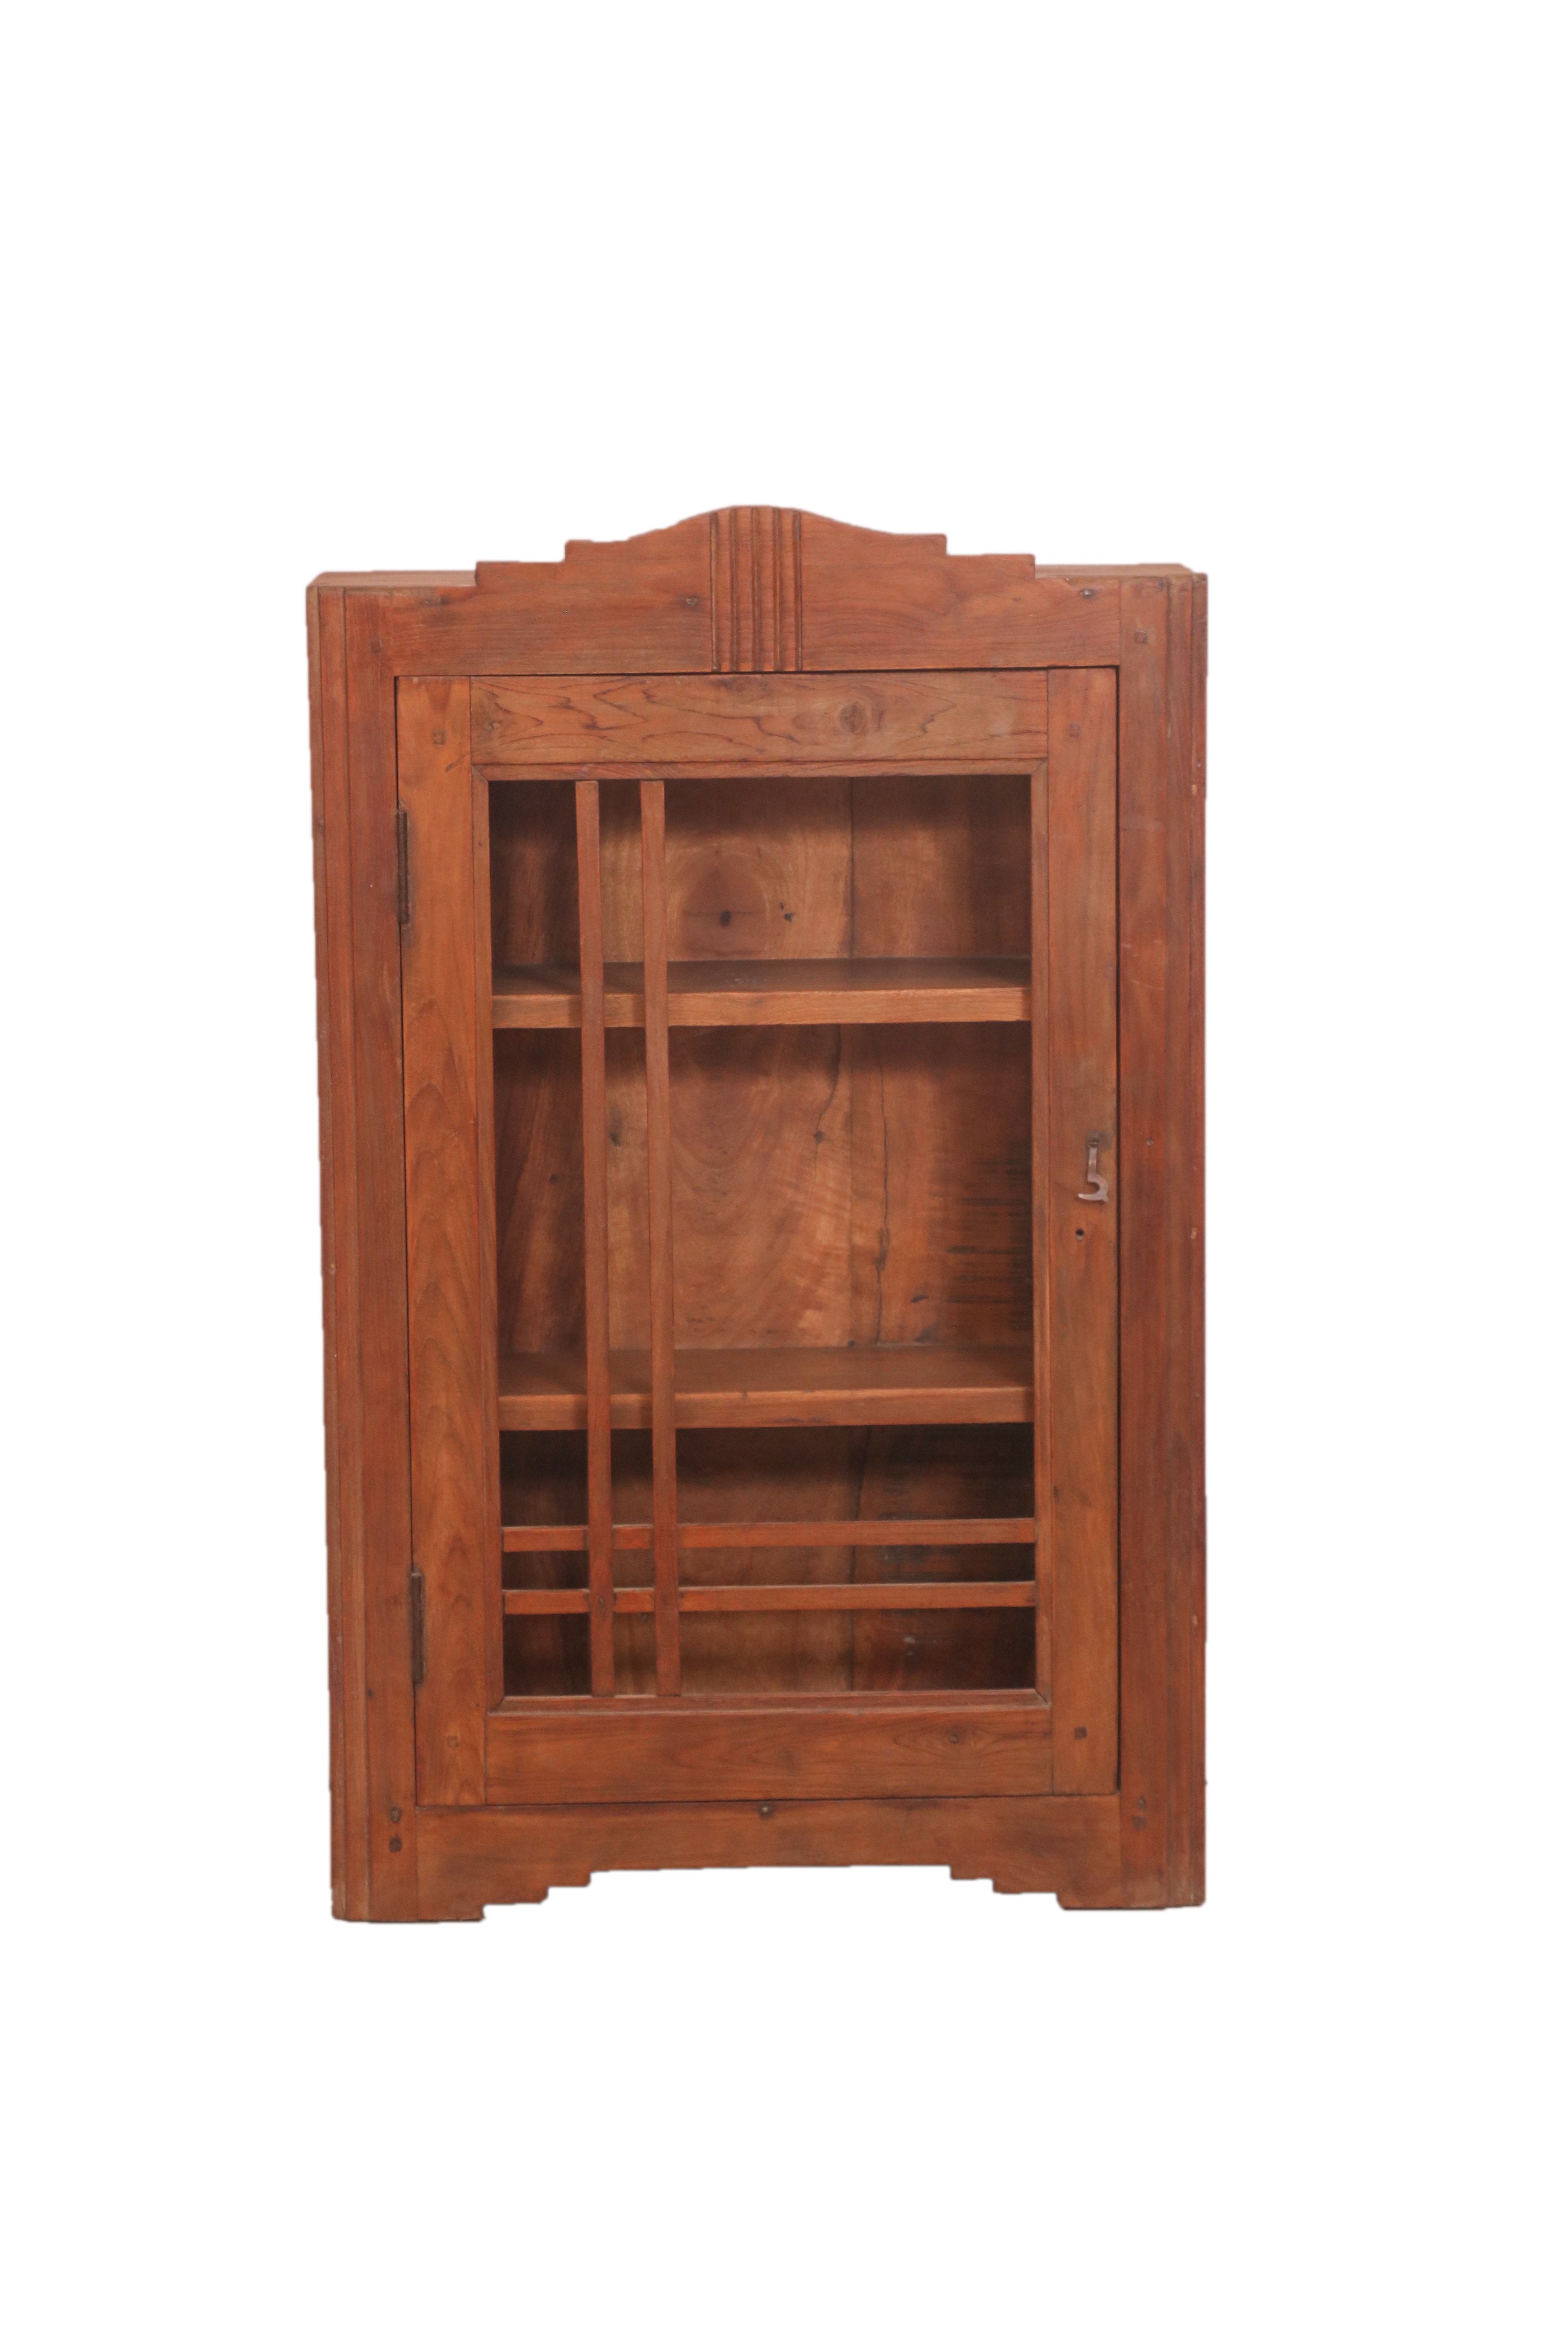 Machette Natural Brown Finished Wooden Handmade Wall Cabinet Wall Cabinet